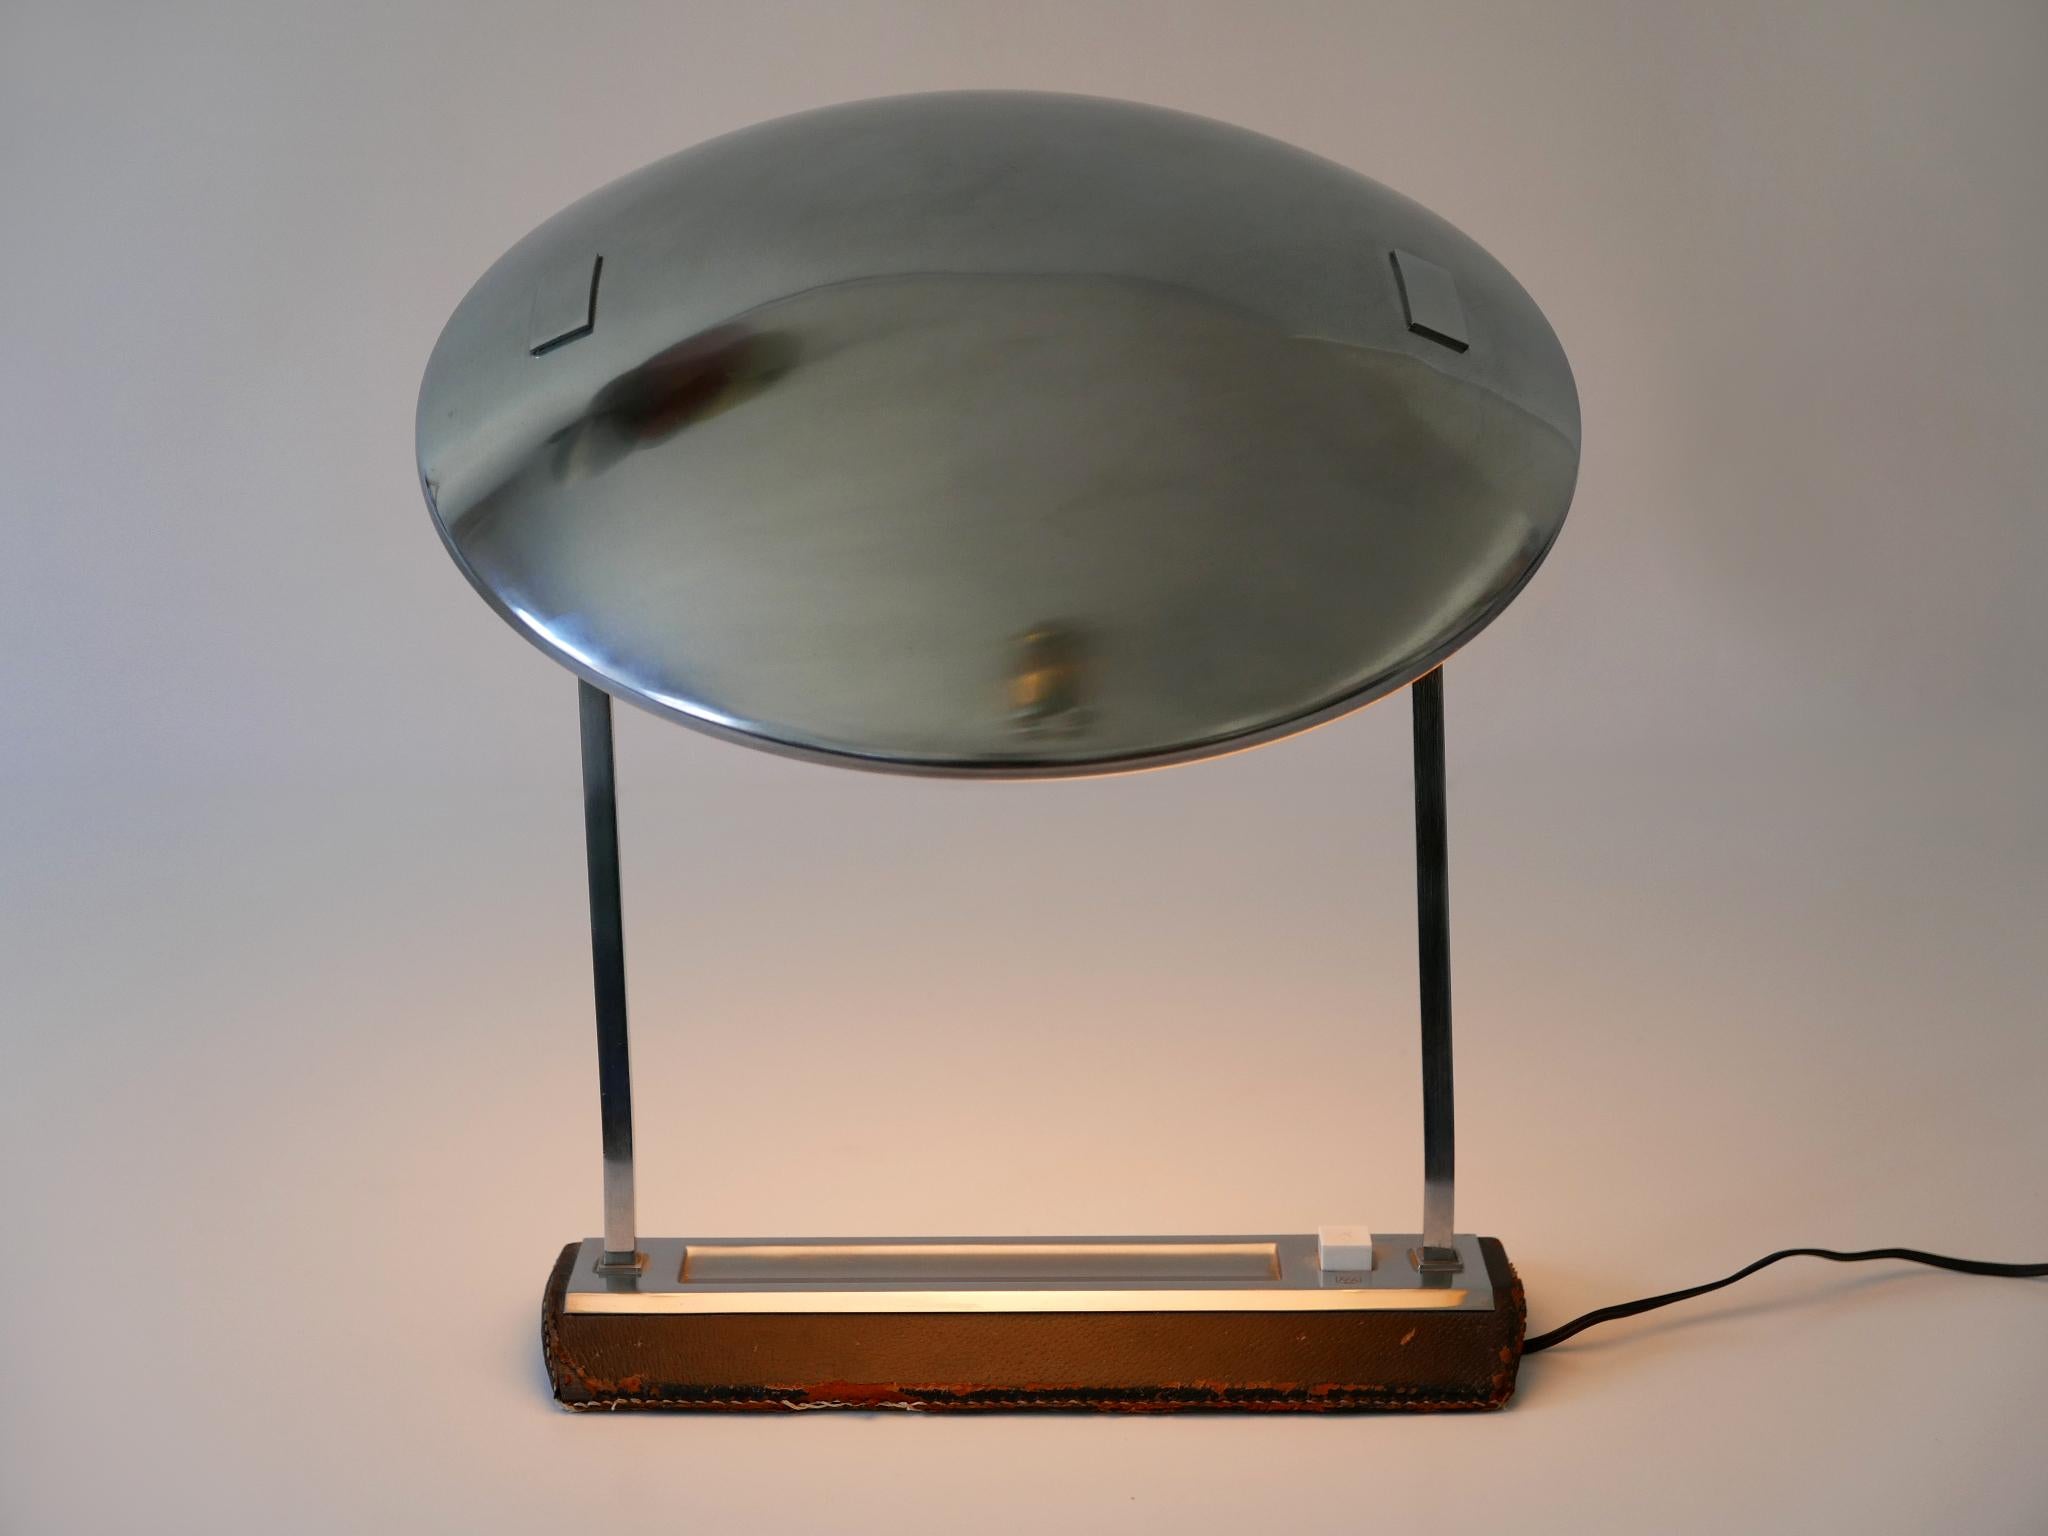 Extremely rare and elegant Mid-Century Modern desk light or table lamp. Model 8050. Adjustable diffusor. Designed by Stilnovo design team, Italy, 1962. Manufactured by Metalarte, Spain, 1960s. (Makers mark on the base).

Although the design of